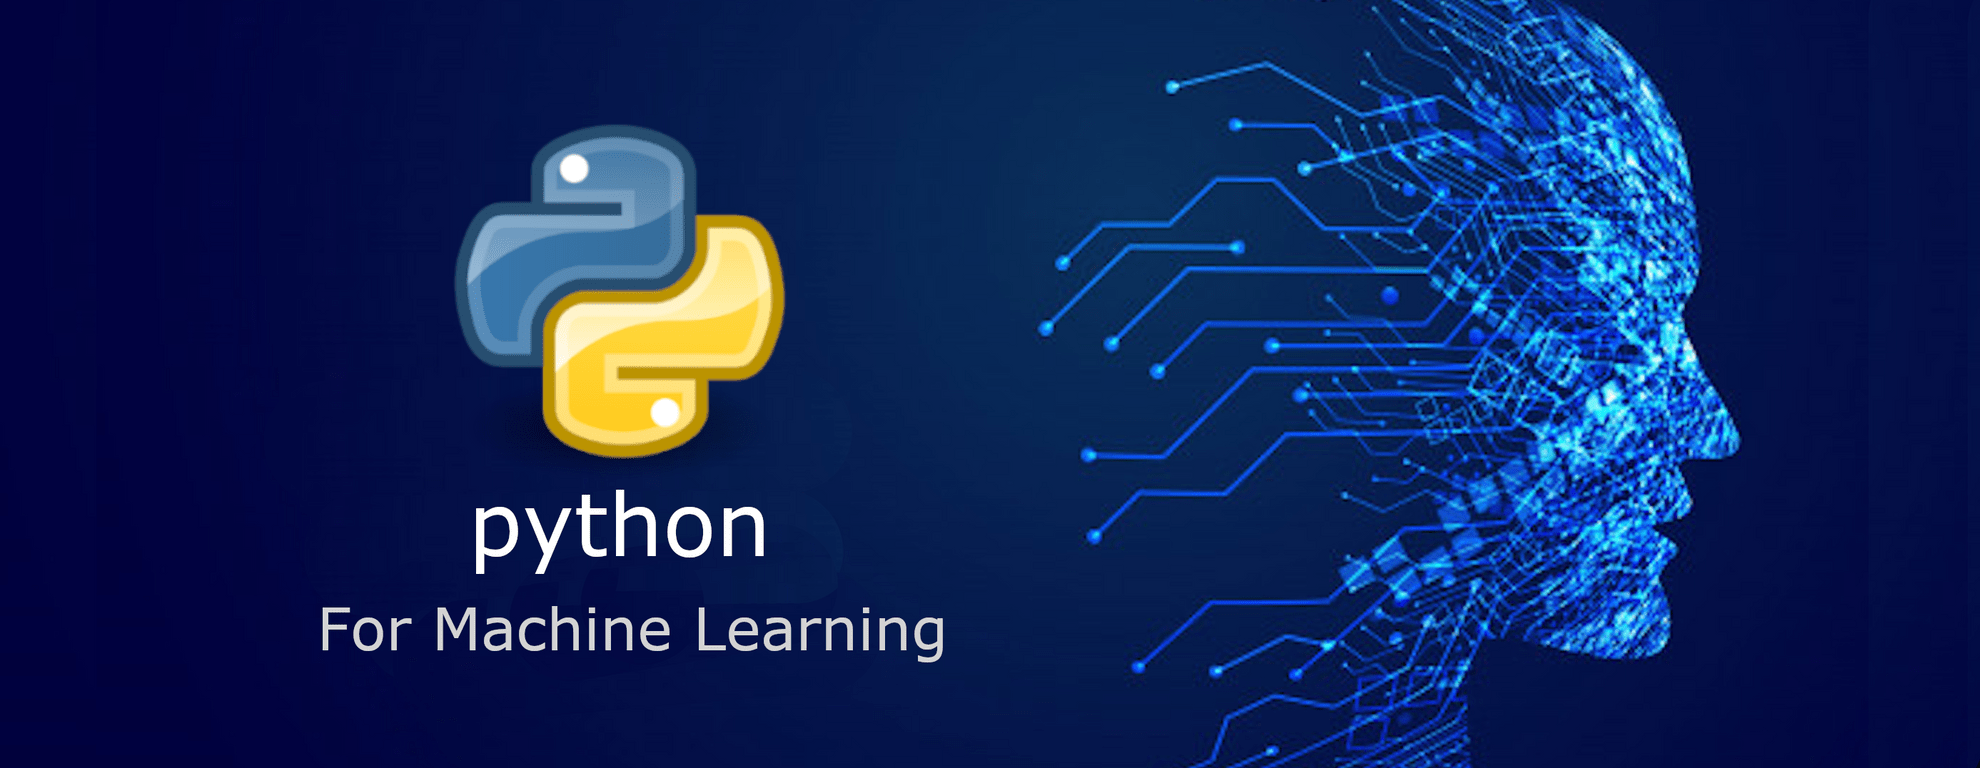 Of Course(s) Python! - Featured image